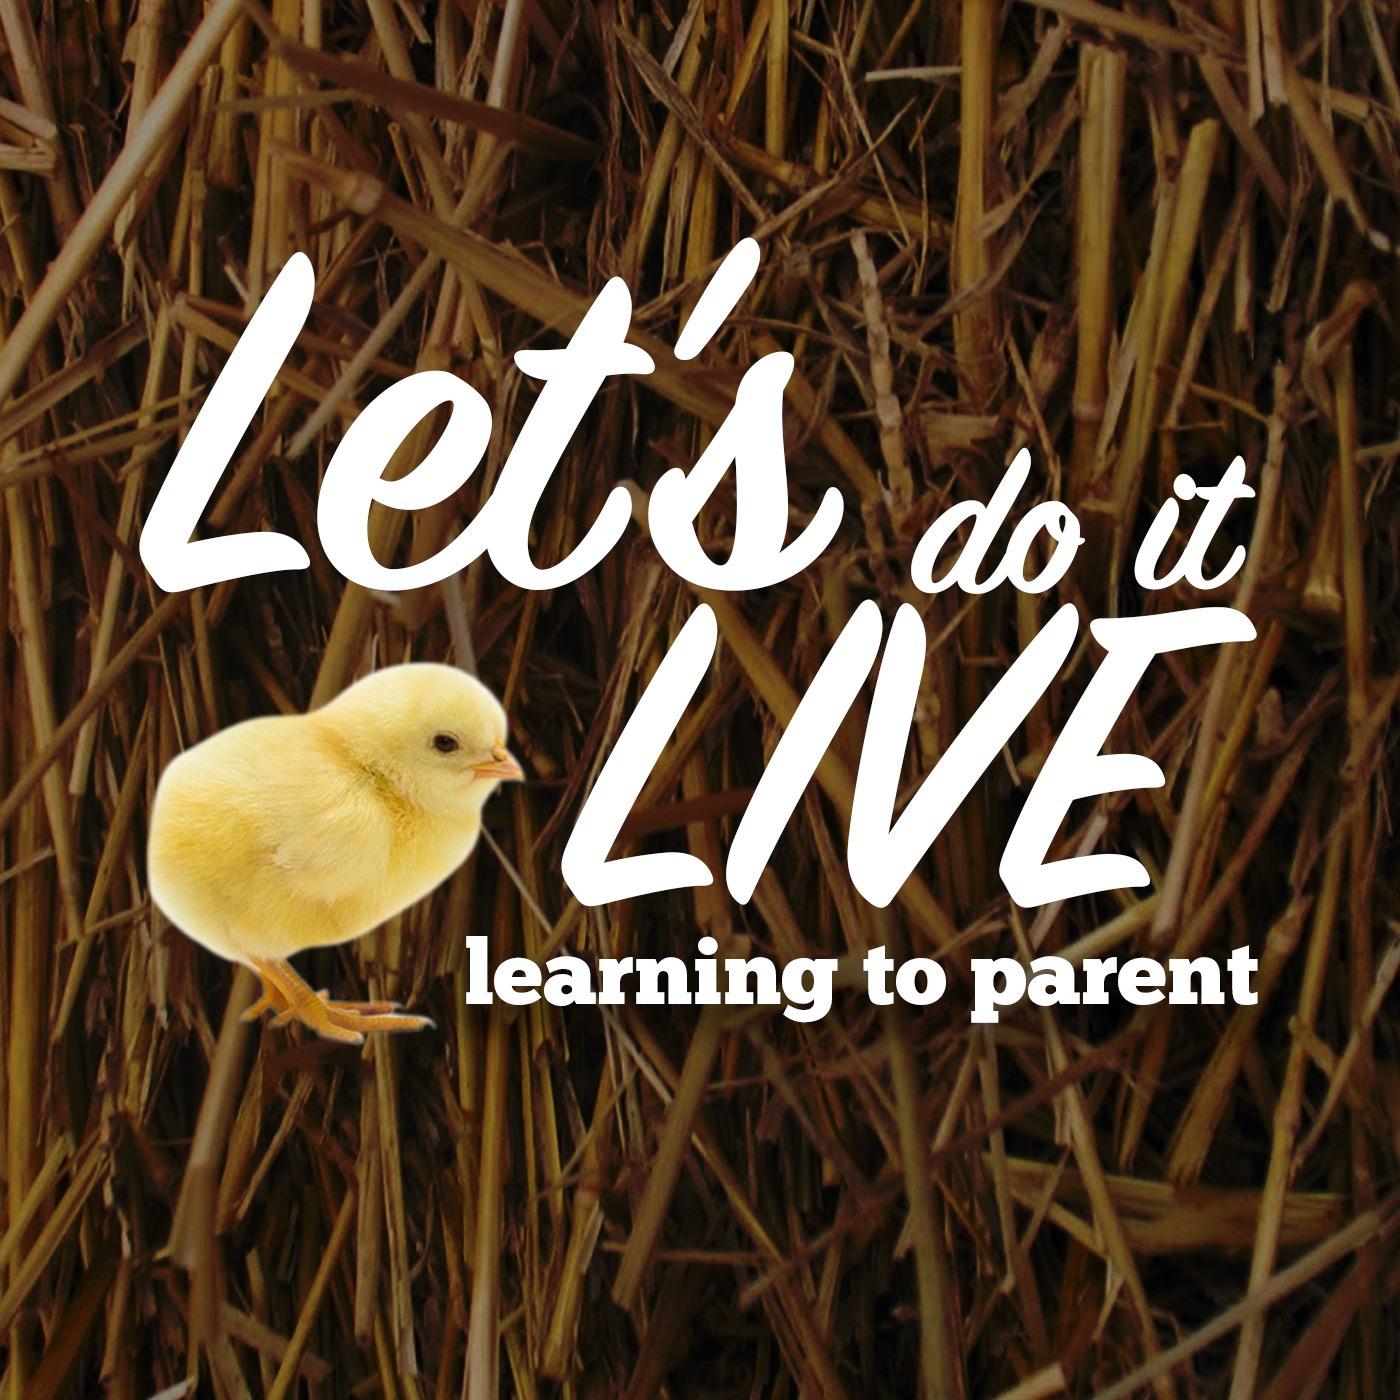 LET'S DO IT LIVE: learning to parent